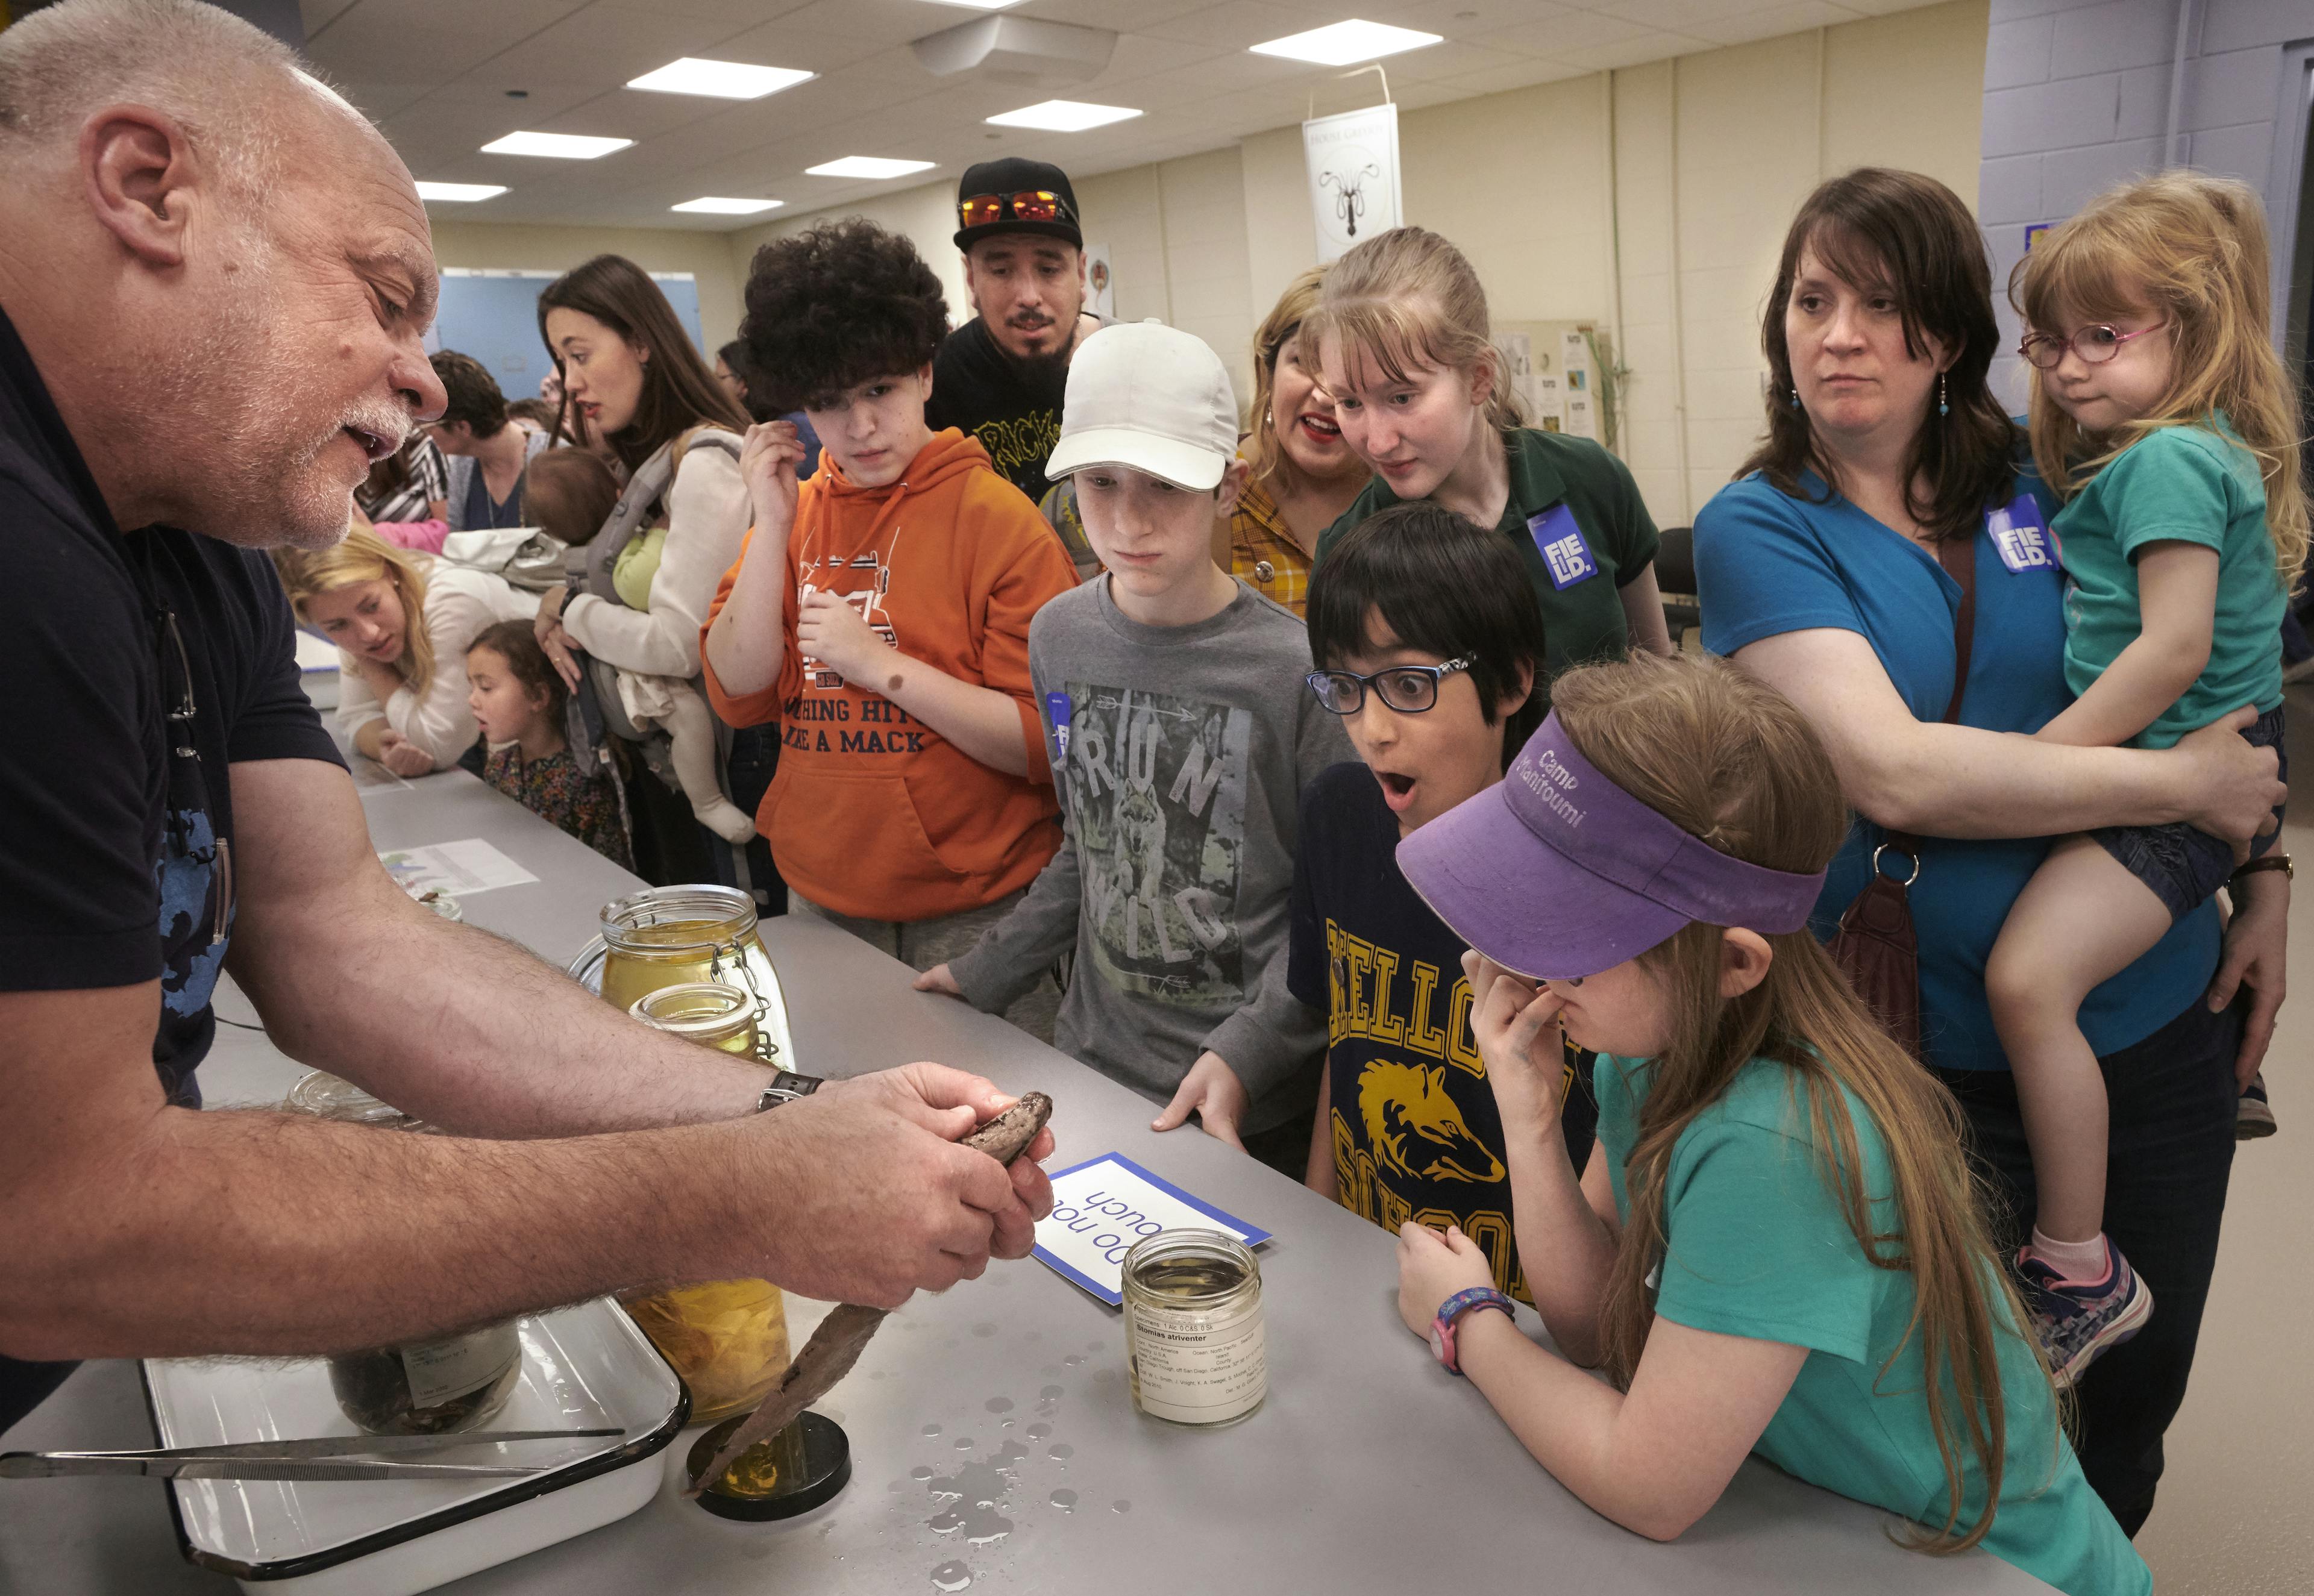 A scientist show a fish specimen to a group of visitors across a table.